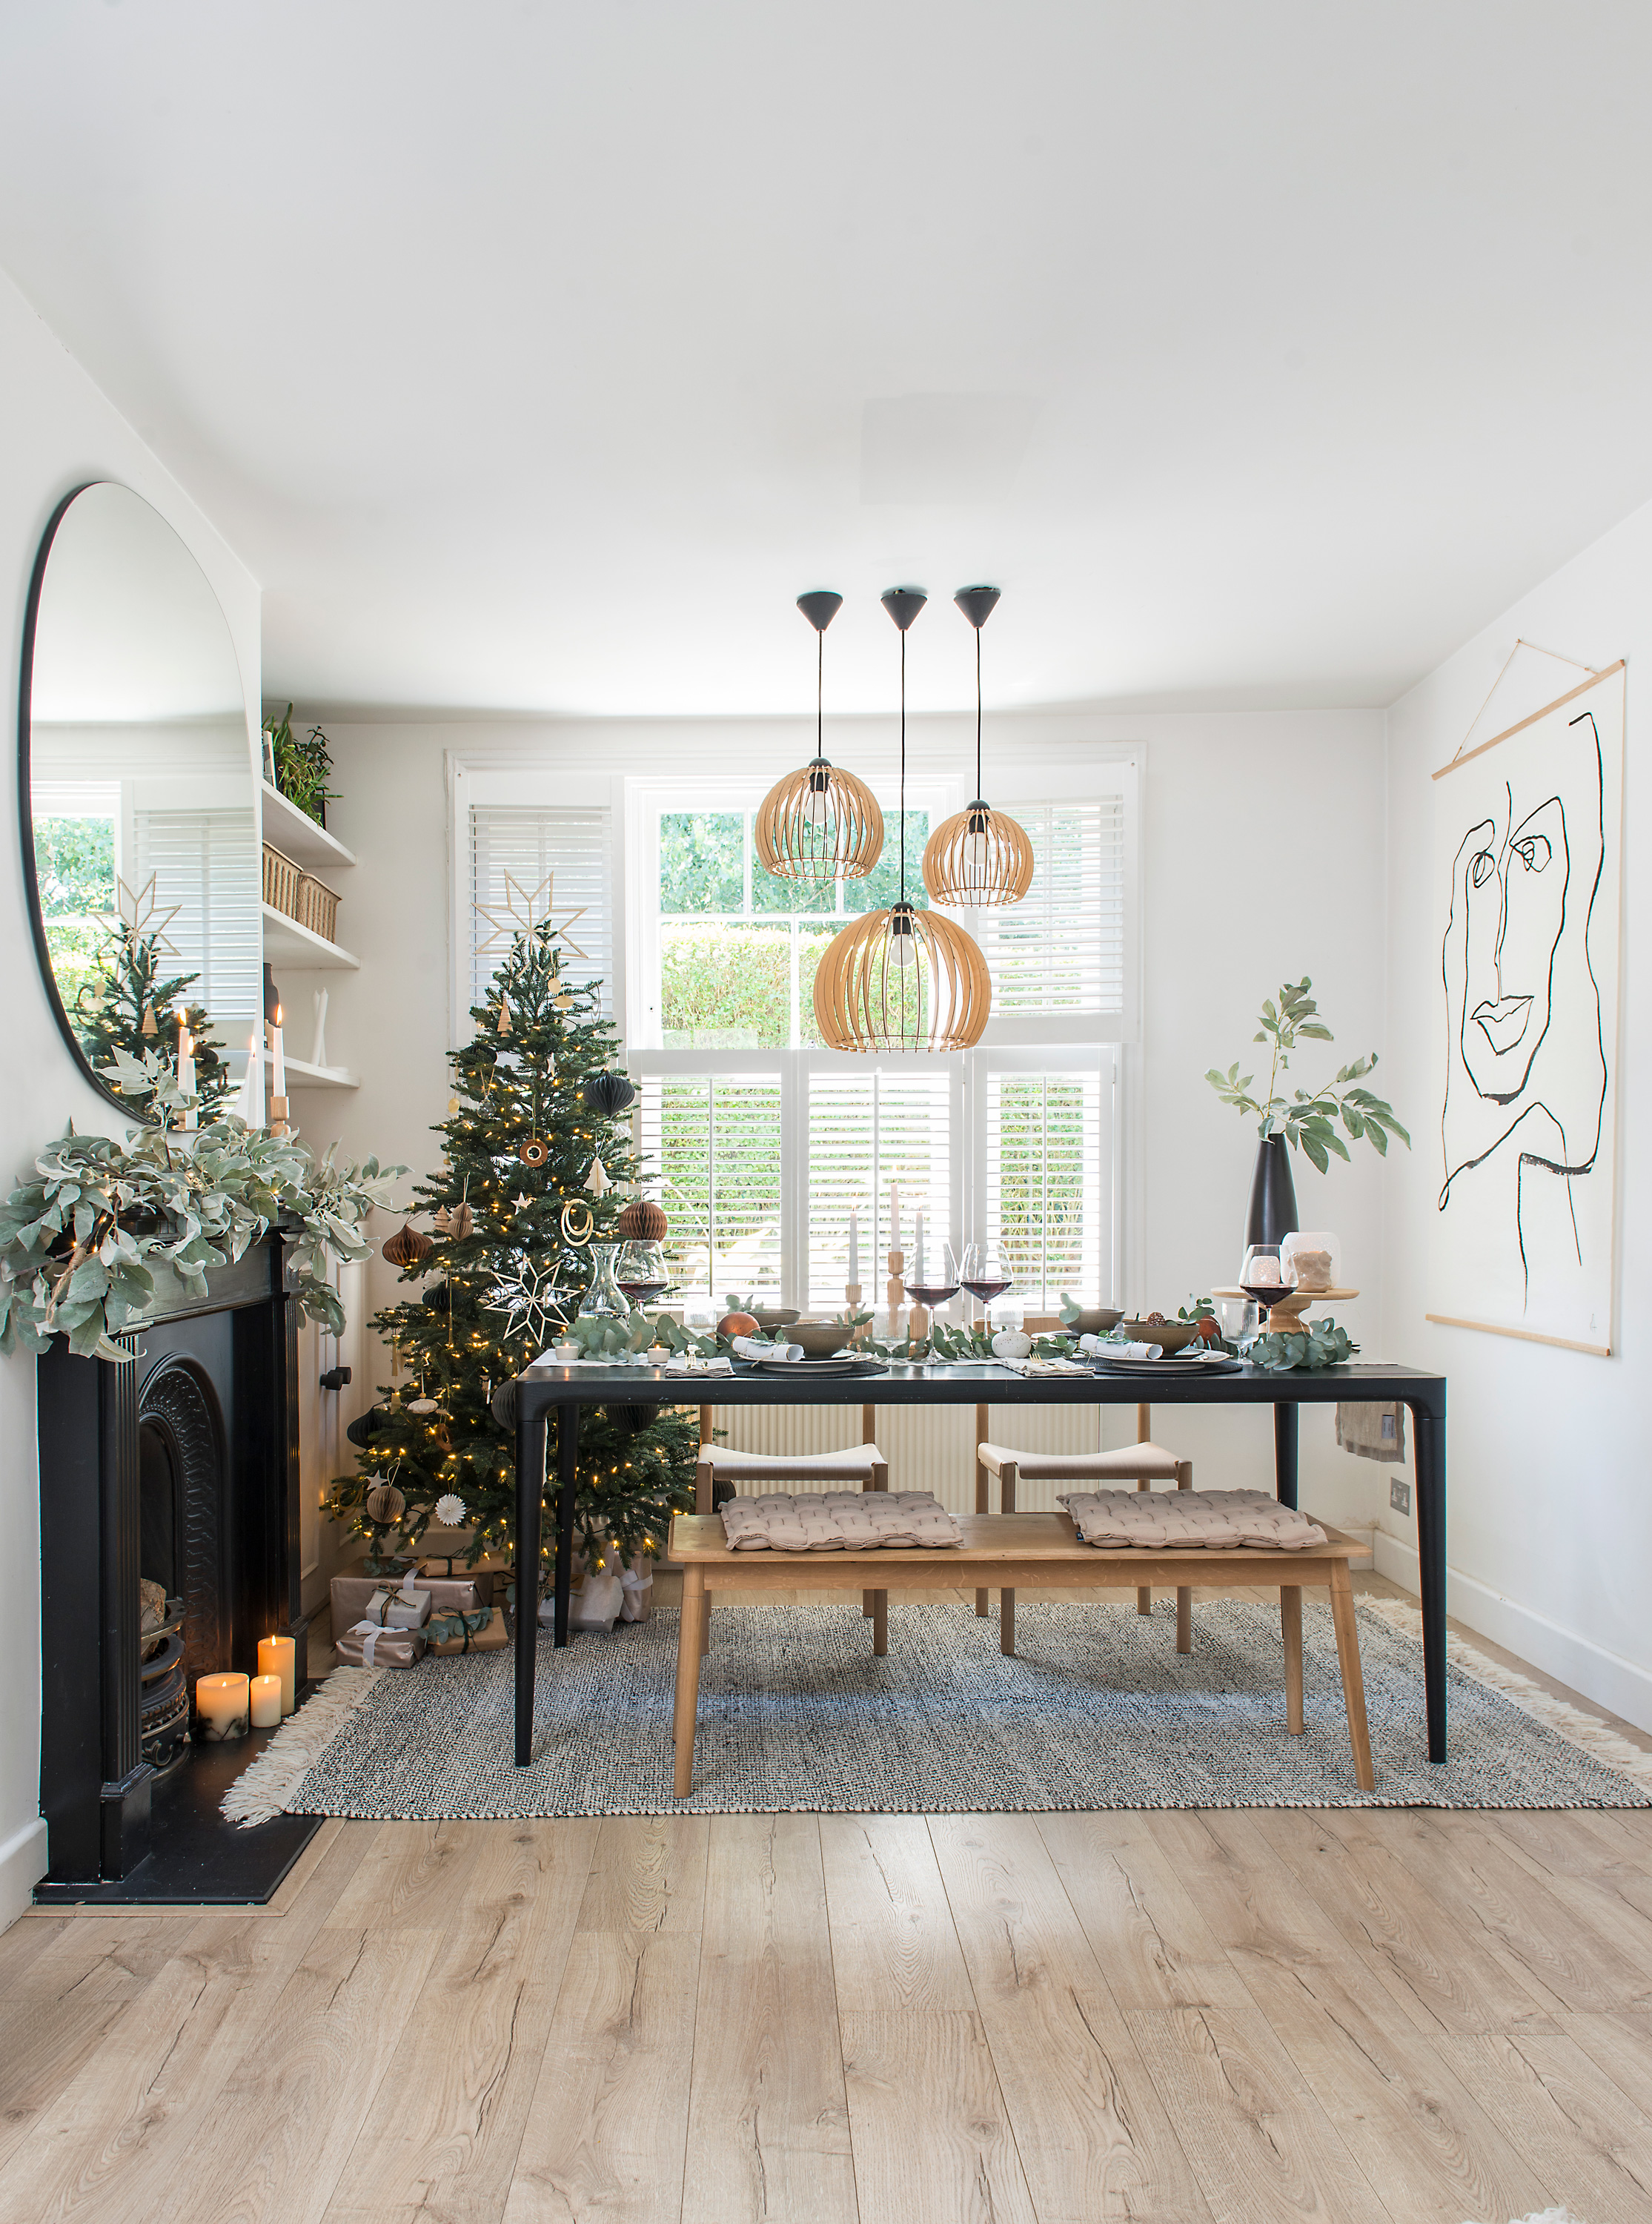 Decorating with Danish-designed pieces, natural materials and lots of tactile textures has put heart and soul into Katie and Russell's stylish home